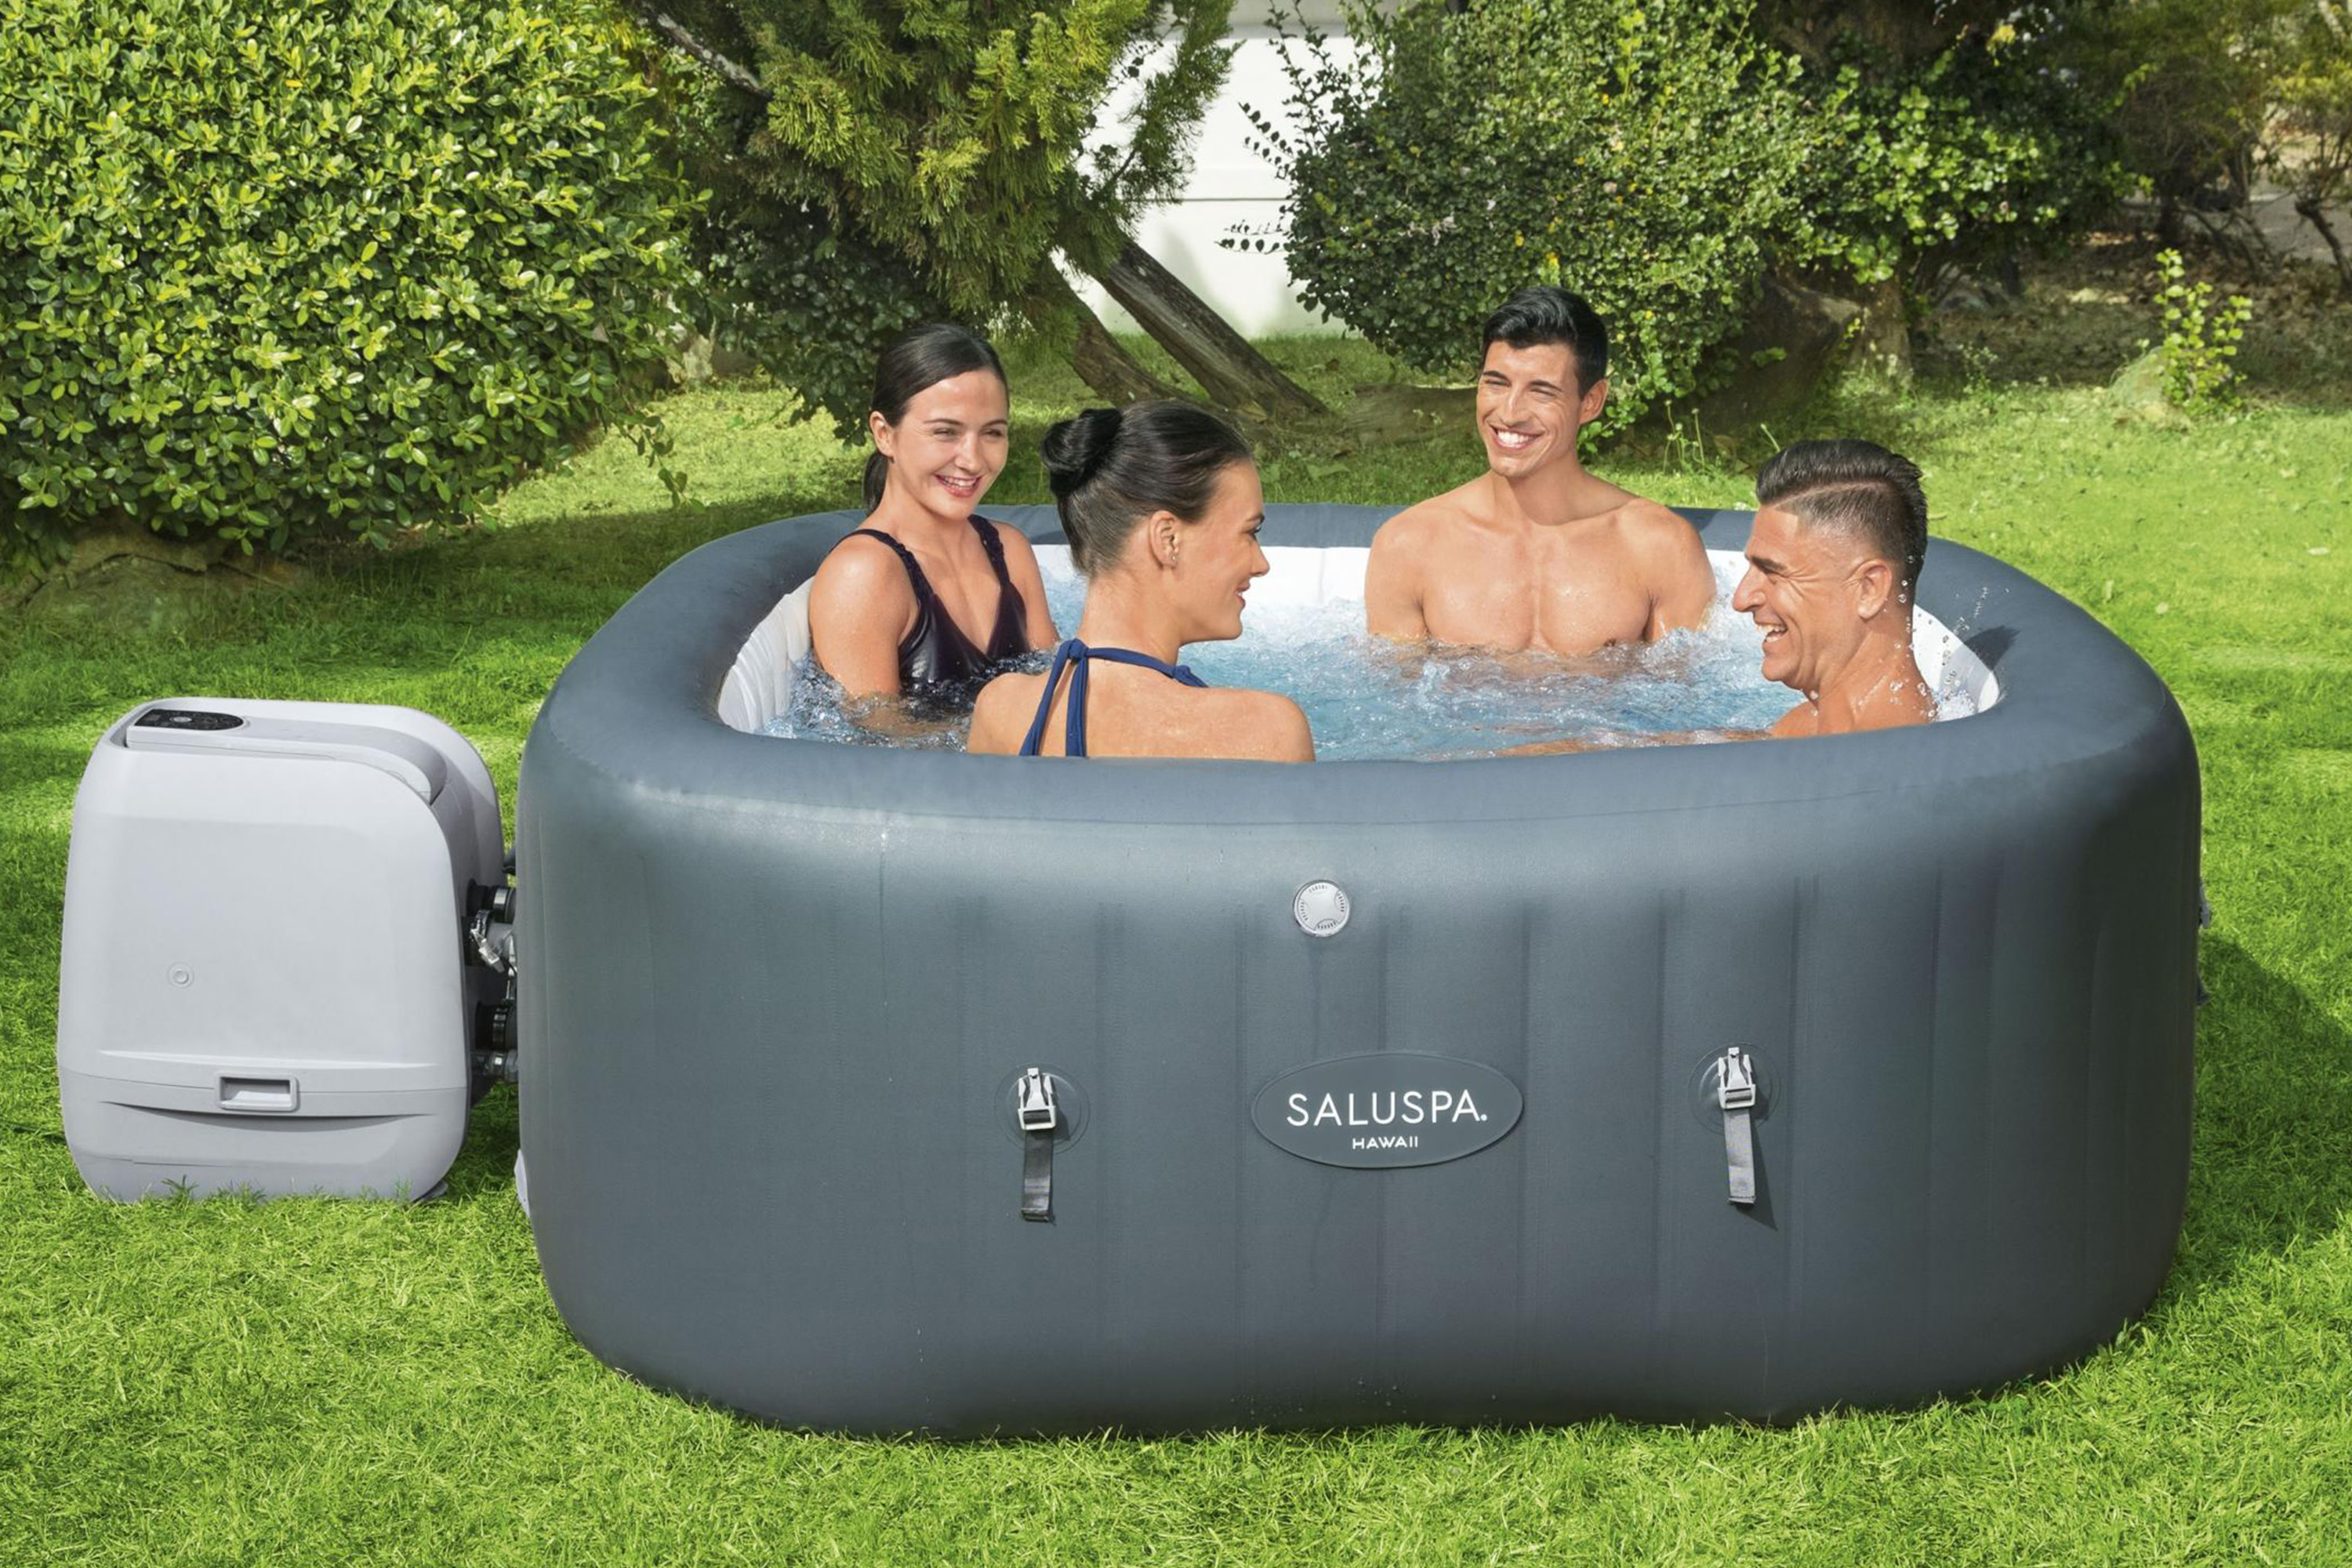 SaluSpa Hawaii HydroJet Pro Inflatable Hot Tub Spa 4-6 Person - image 2 of 9